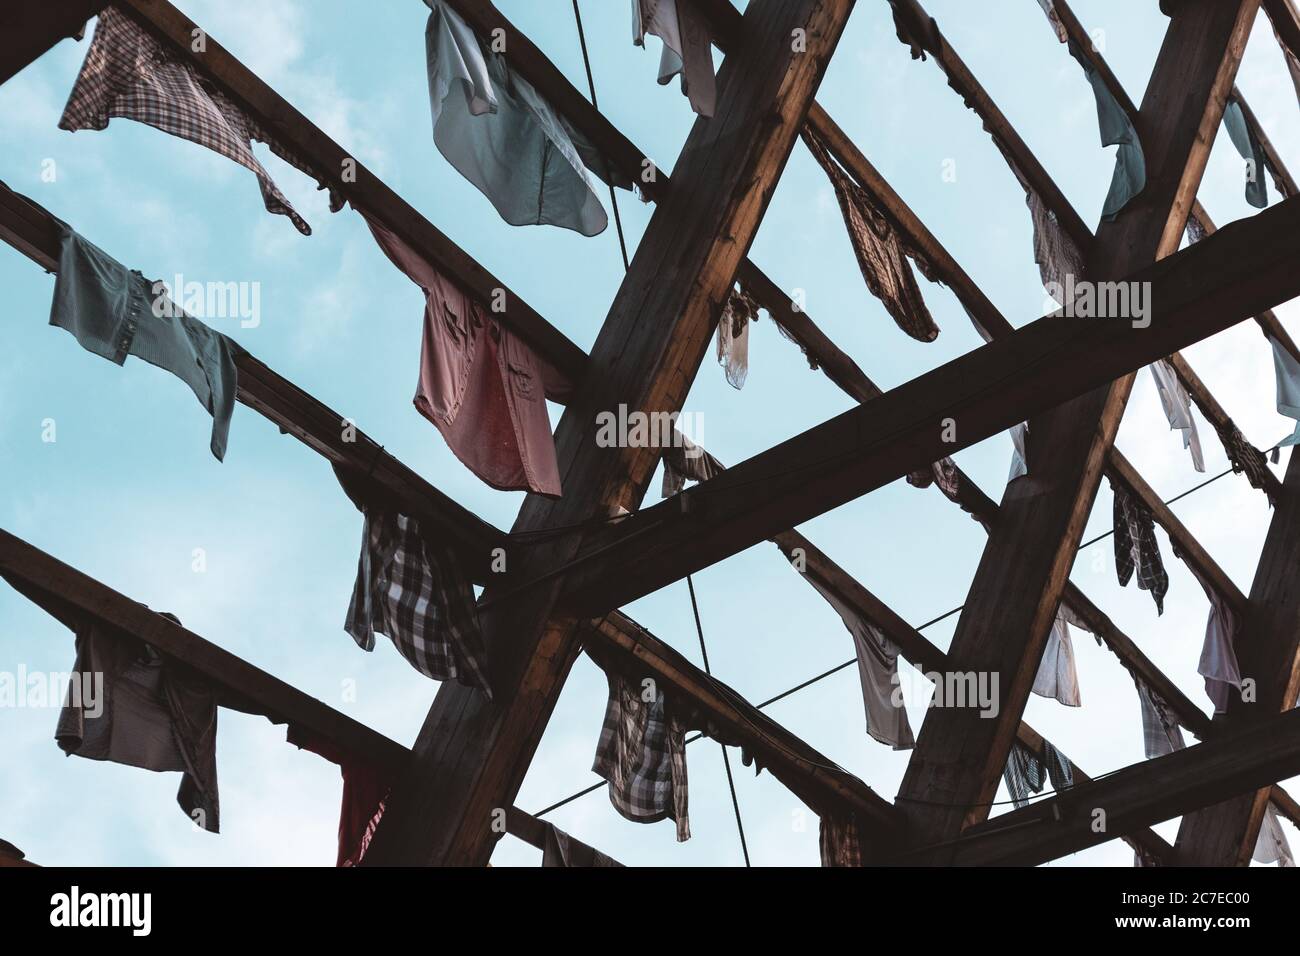 Art installation of colorful shirts clothes hanging on wooden ramp on blue sky background in Oslo, Norway Stock Photo